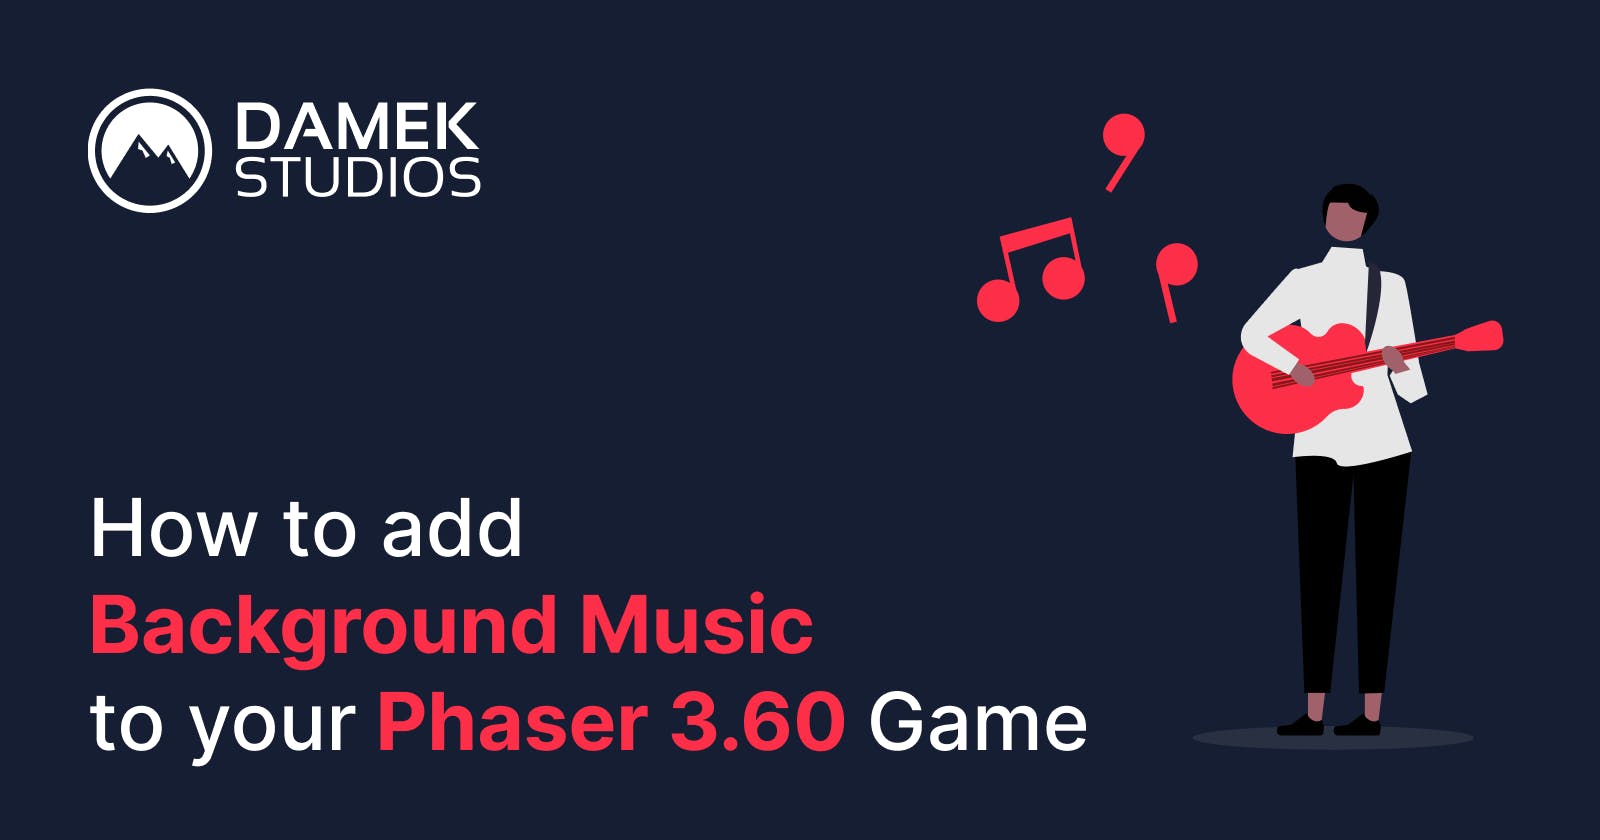 How to add Background Music to your Phaser 3.60 Game